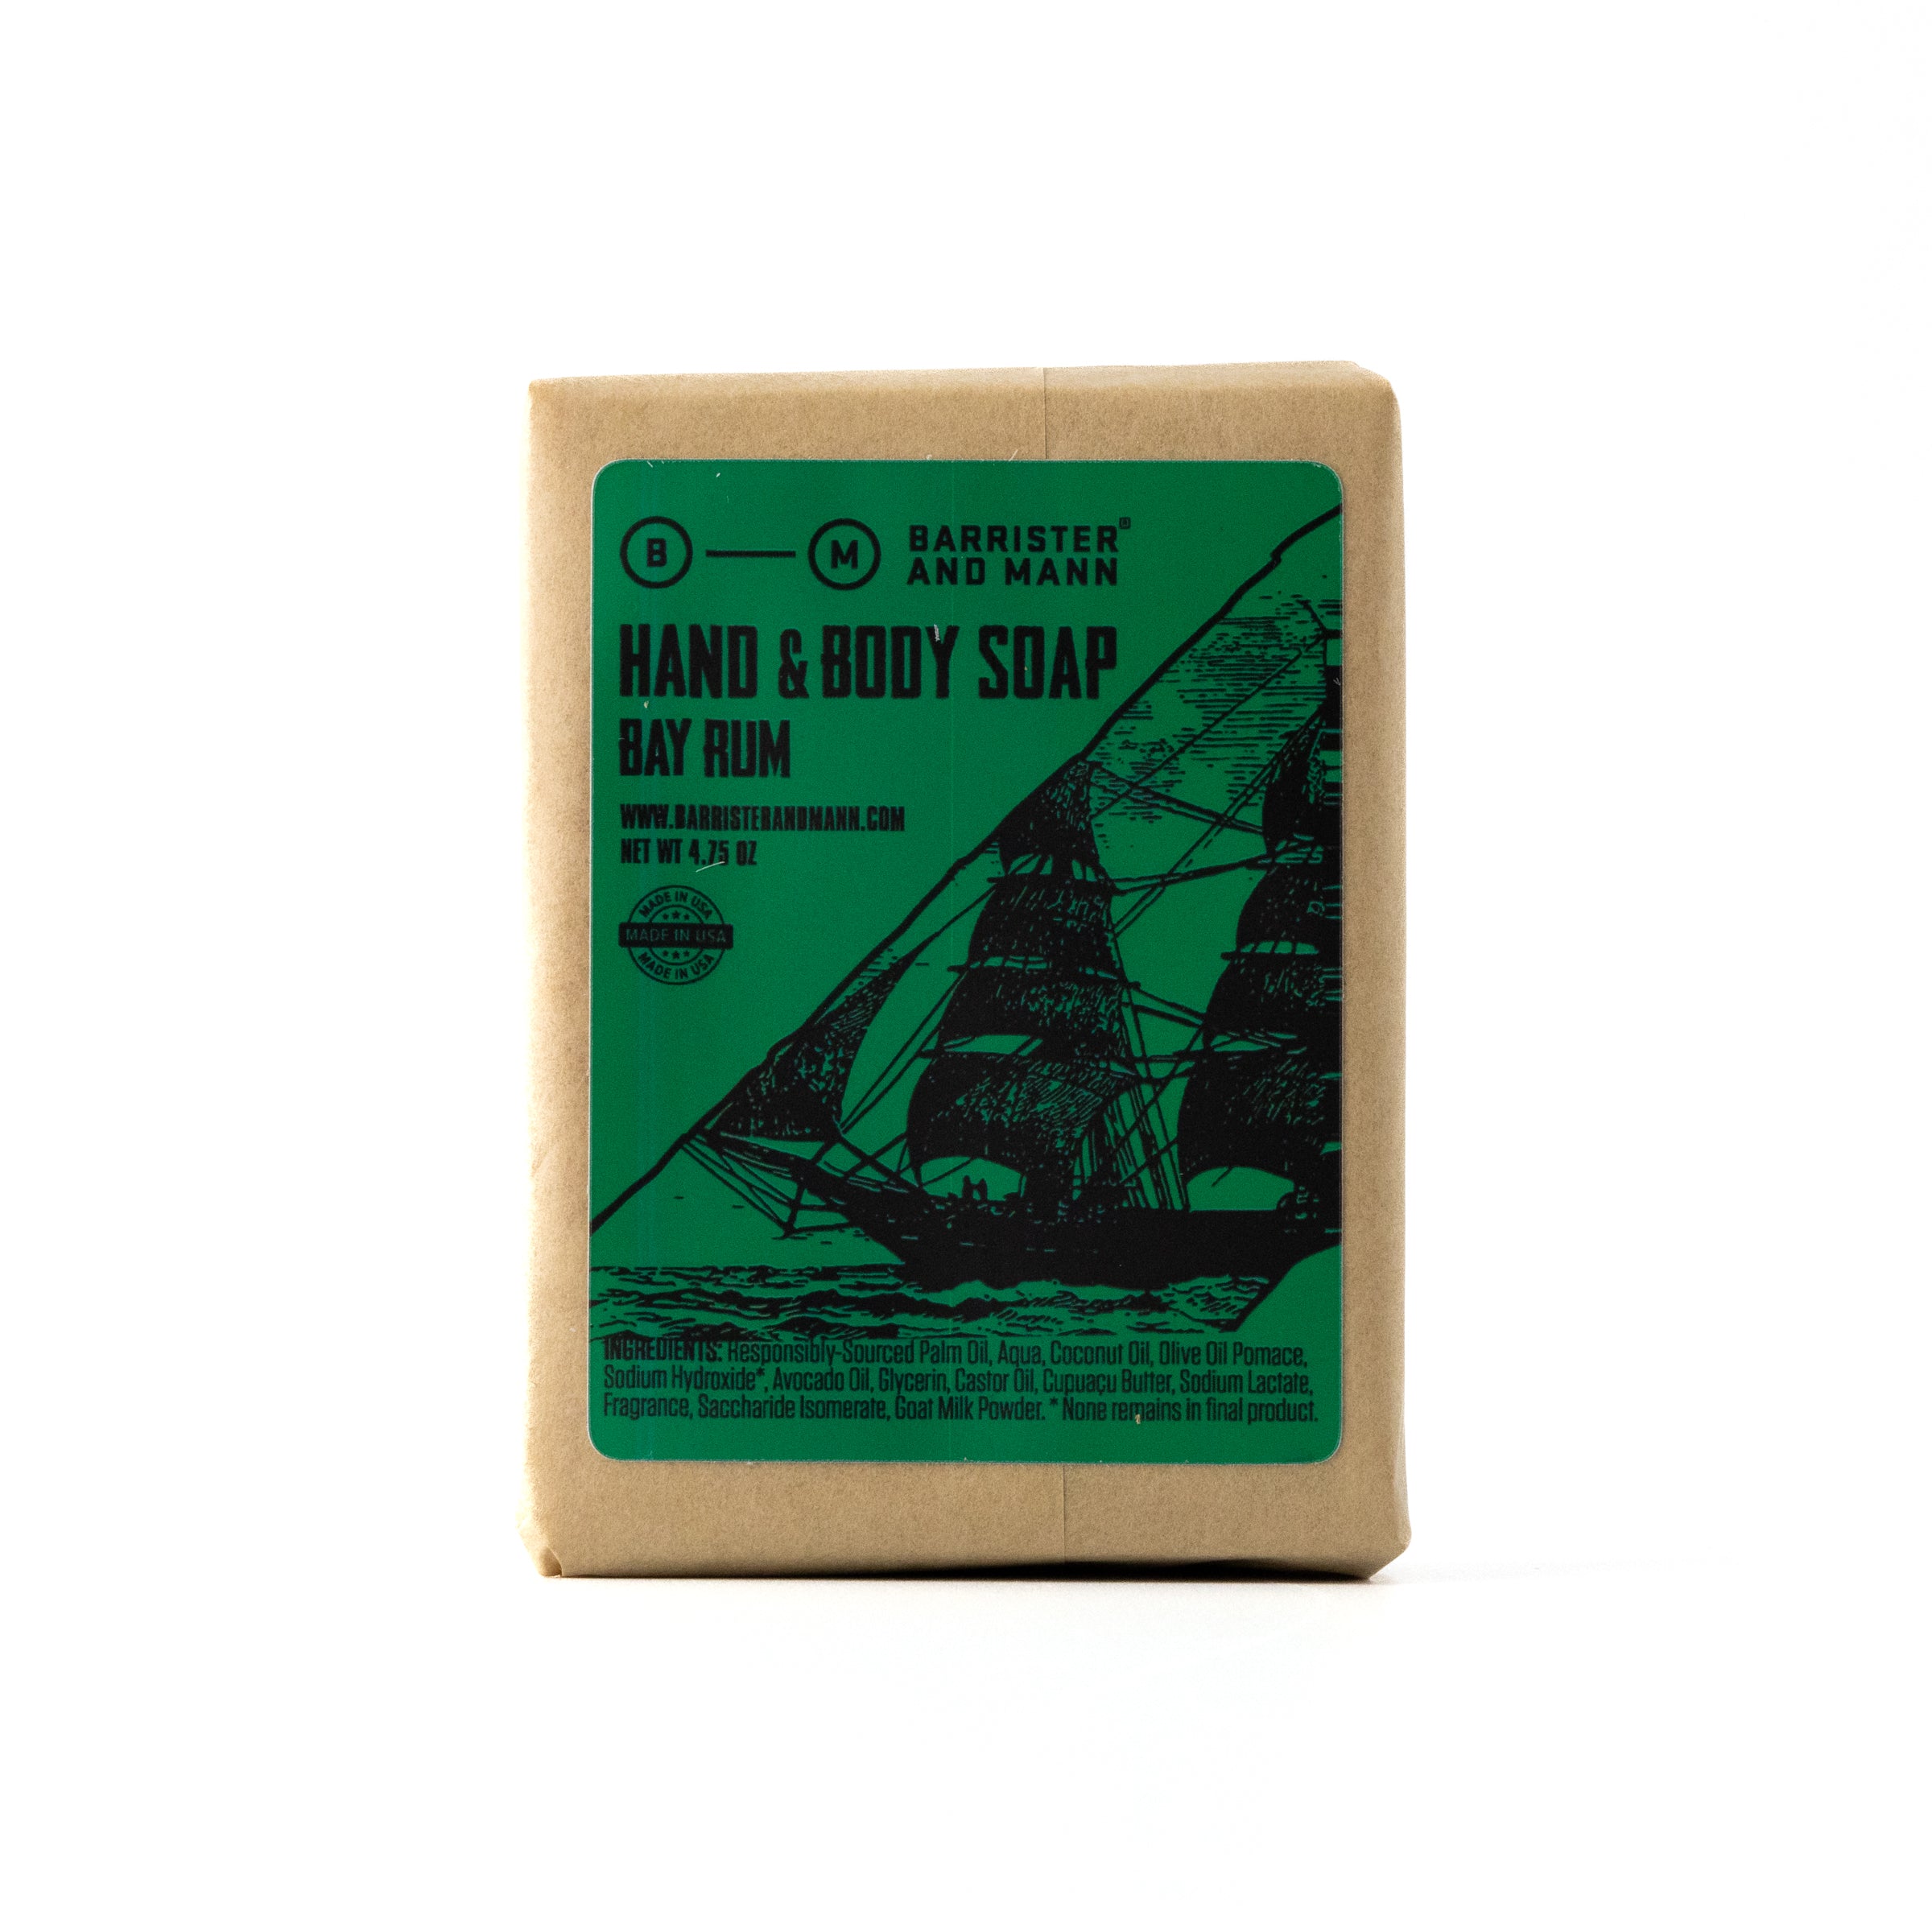 Hand & Body Soap: Bay Rum - Barrister and Mann LLC